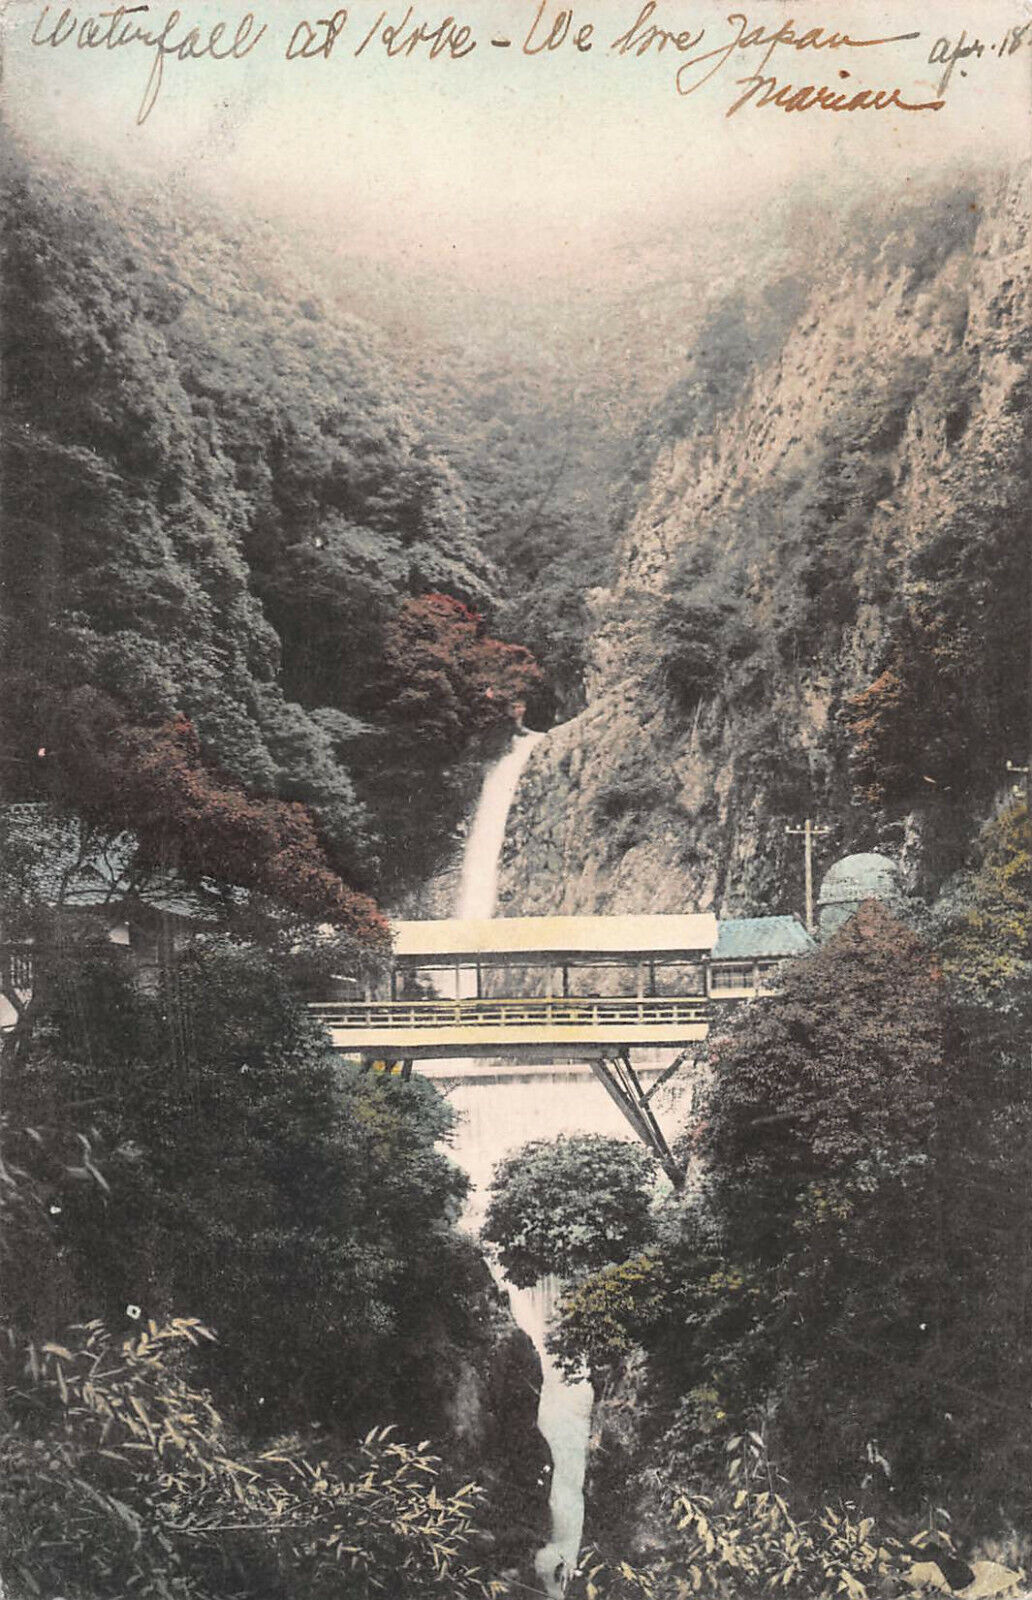 Waterfall at Kobe, Japan, Early Postcard, Used in 1907, sent to St. Louis, MO.